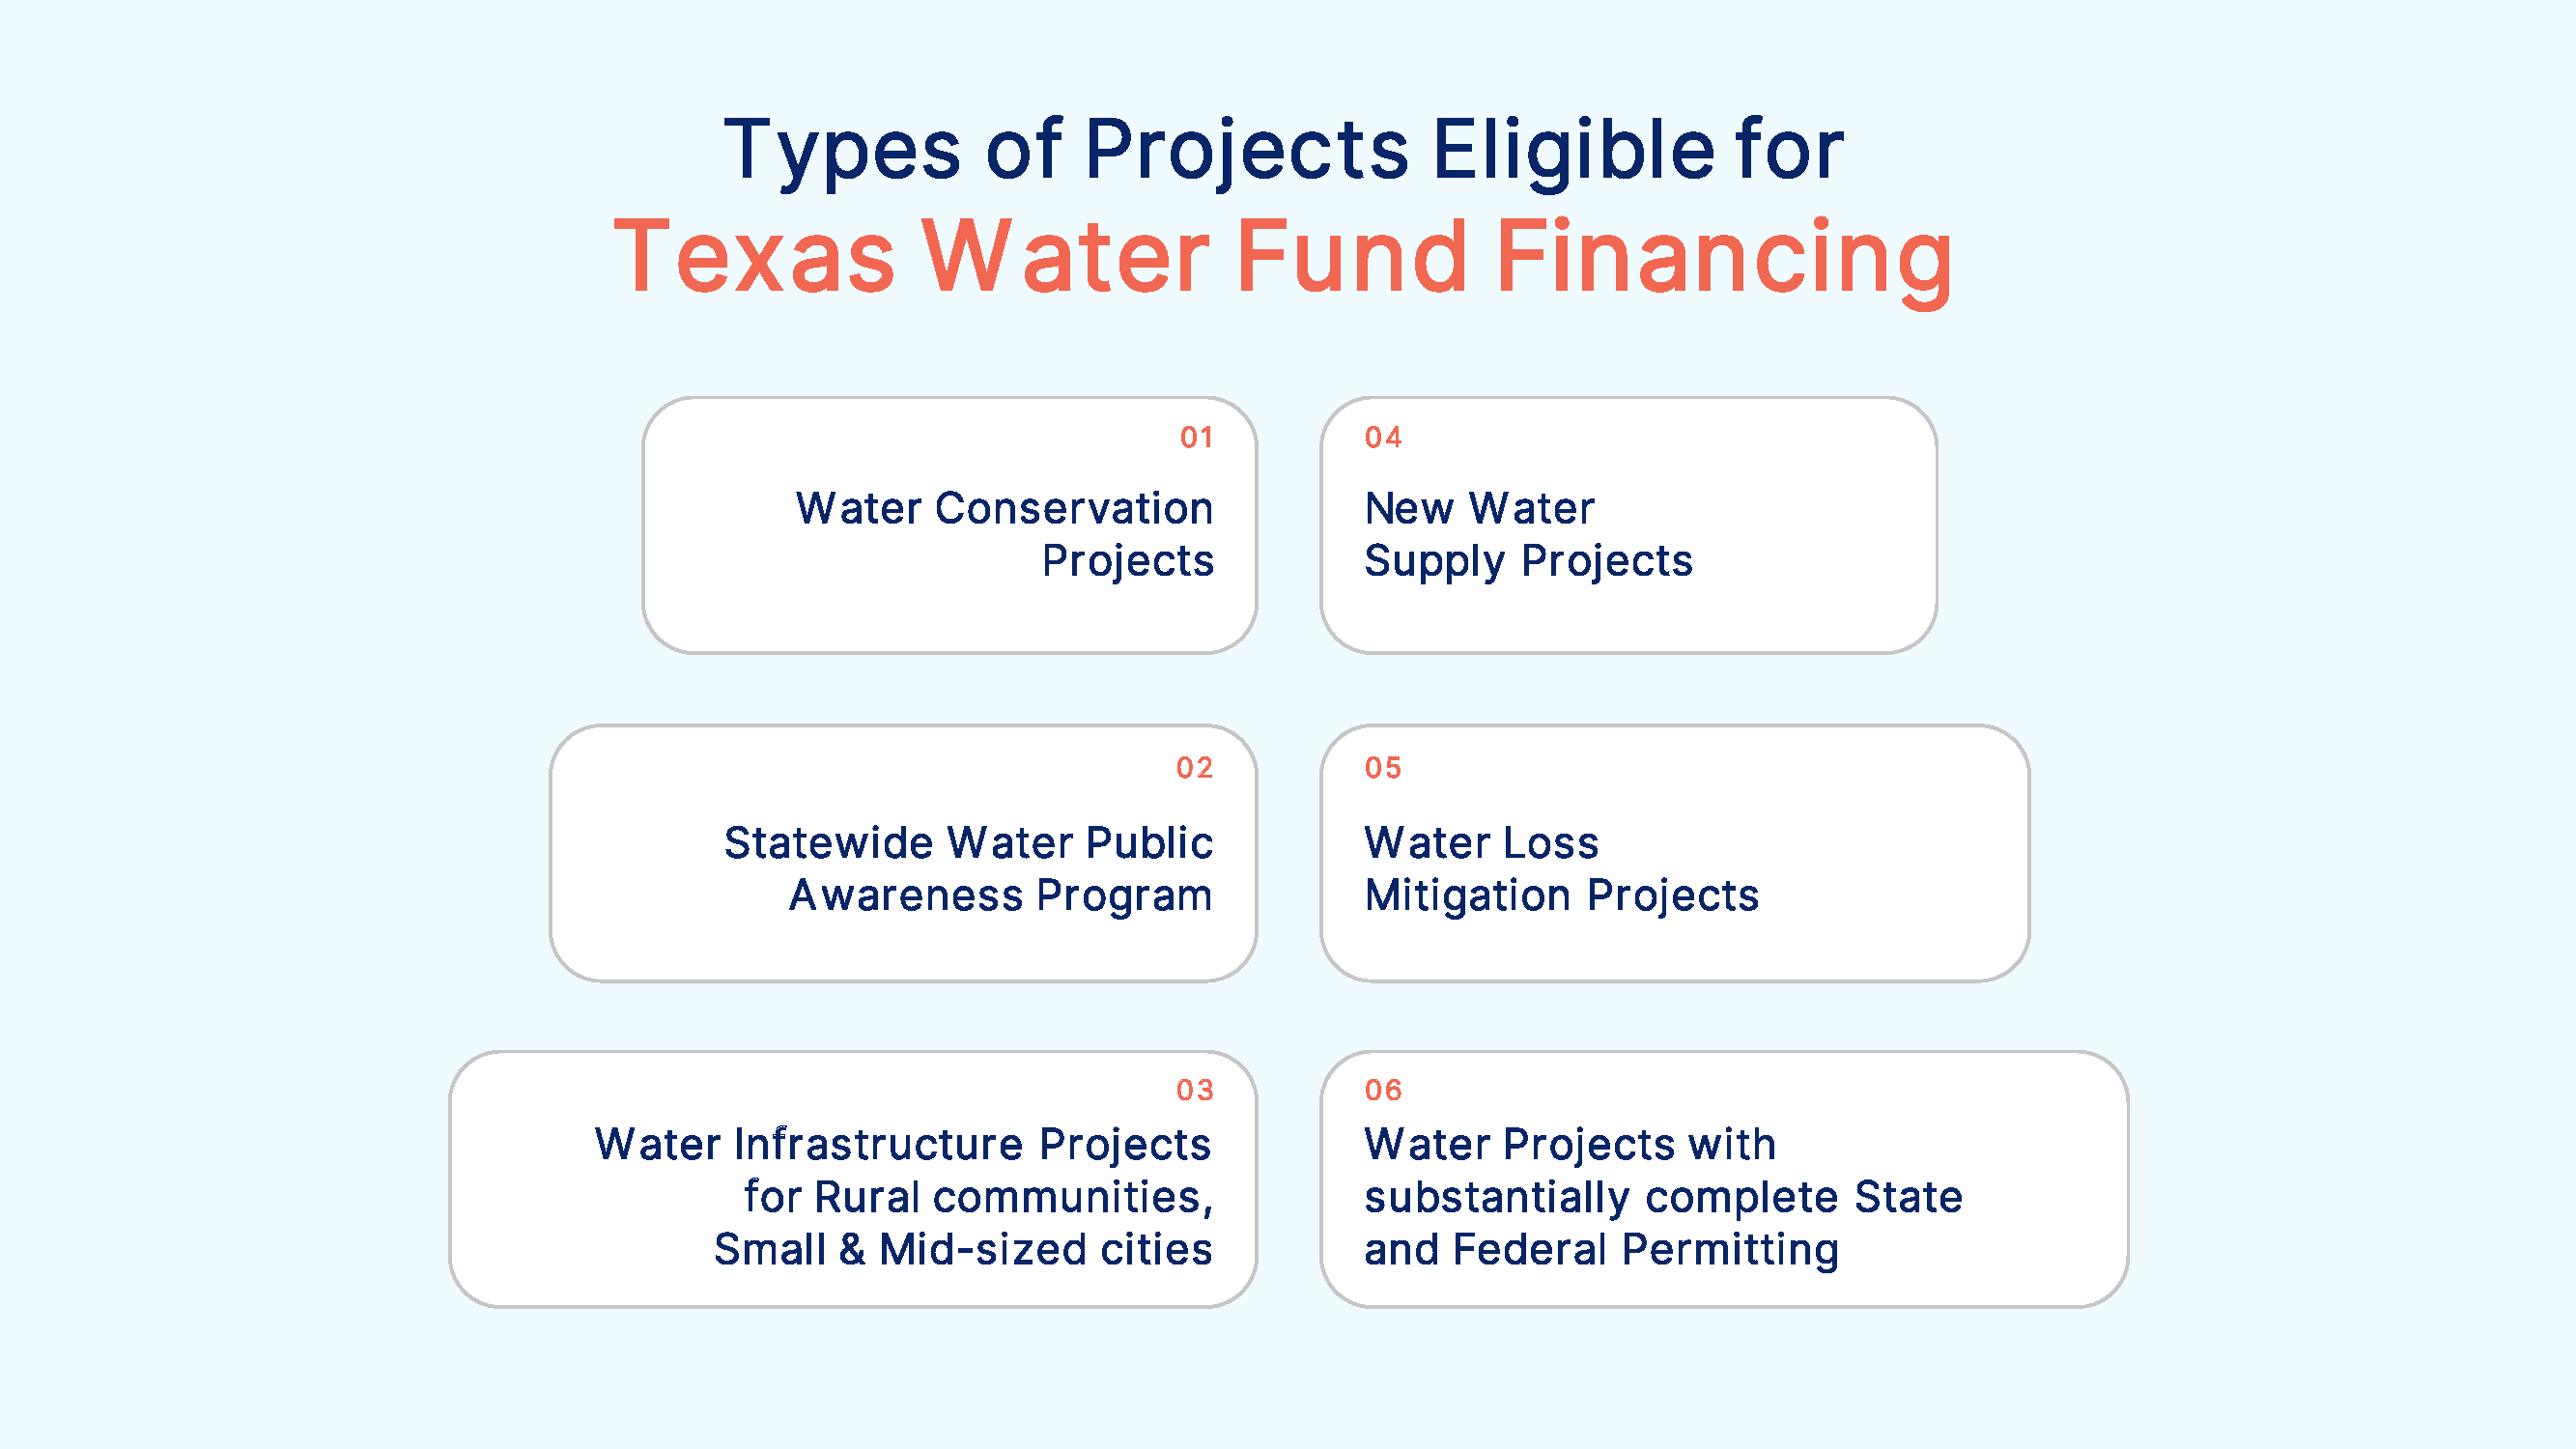 Types of projects eligible for Texas Water Fund financing